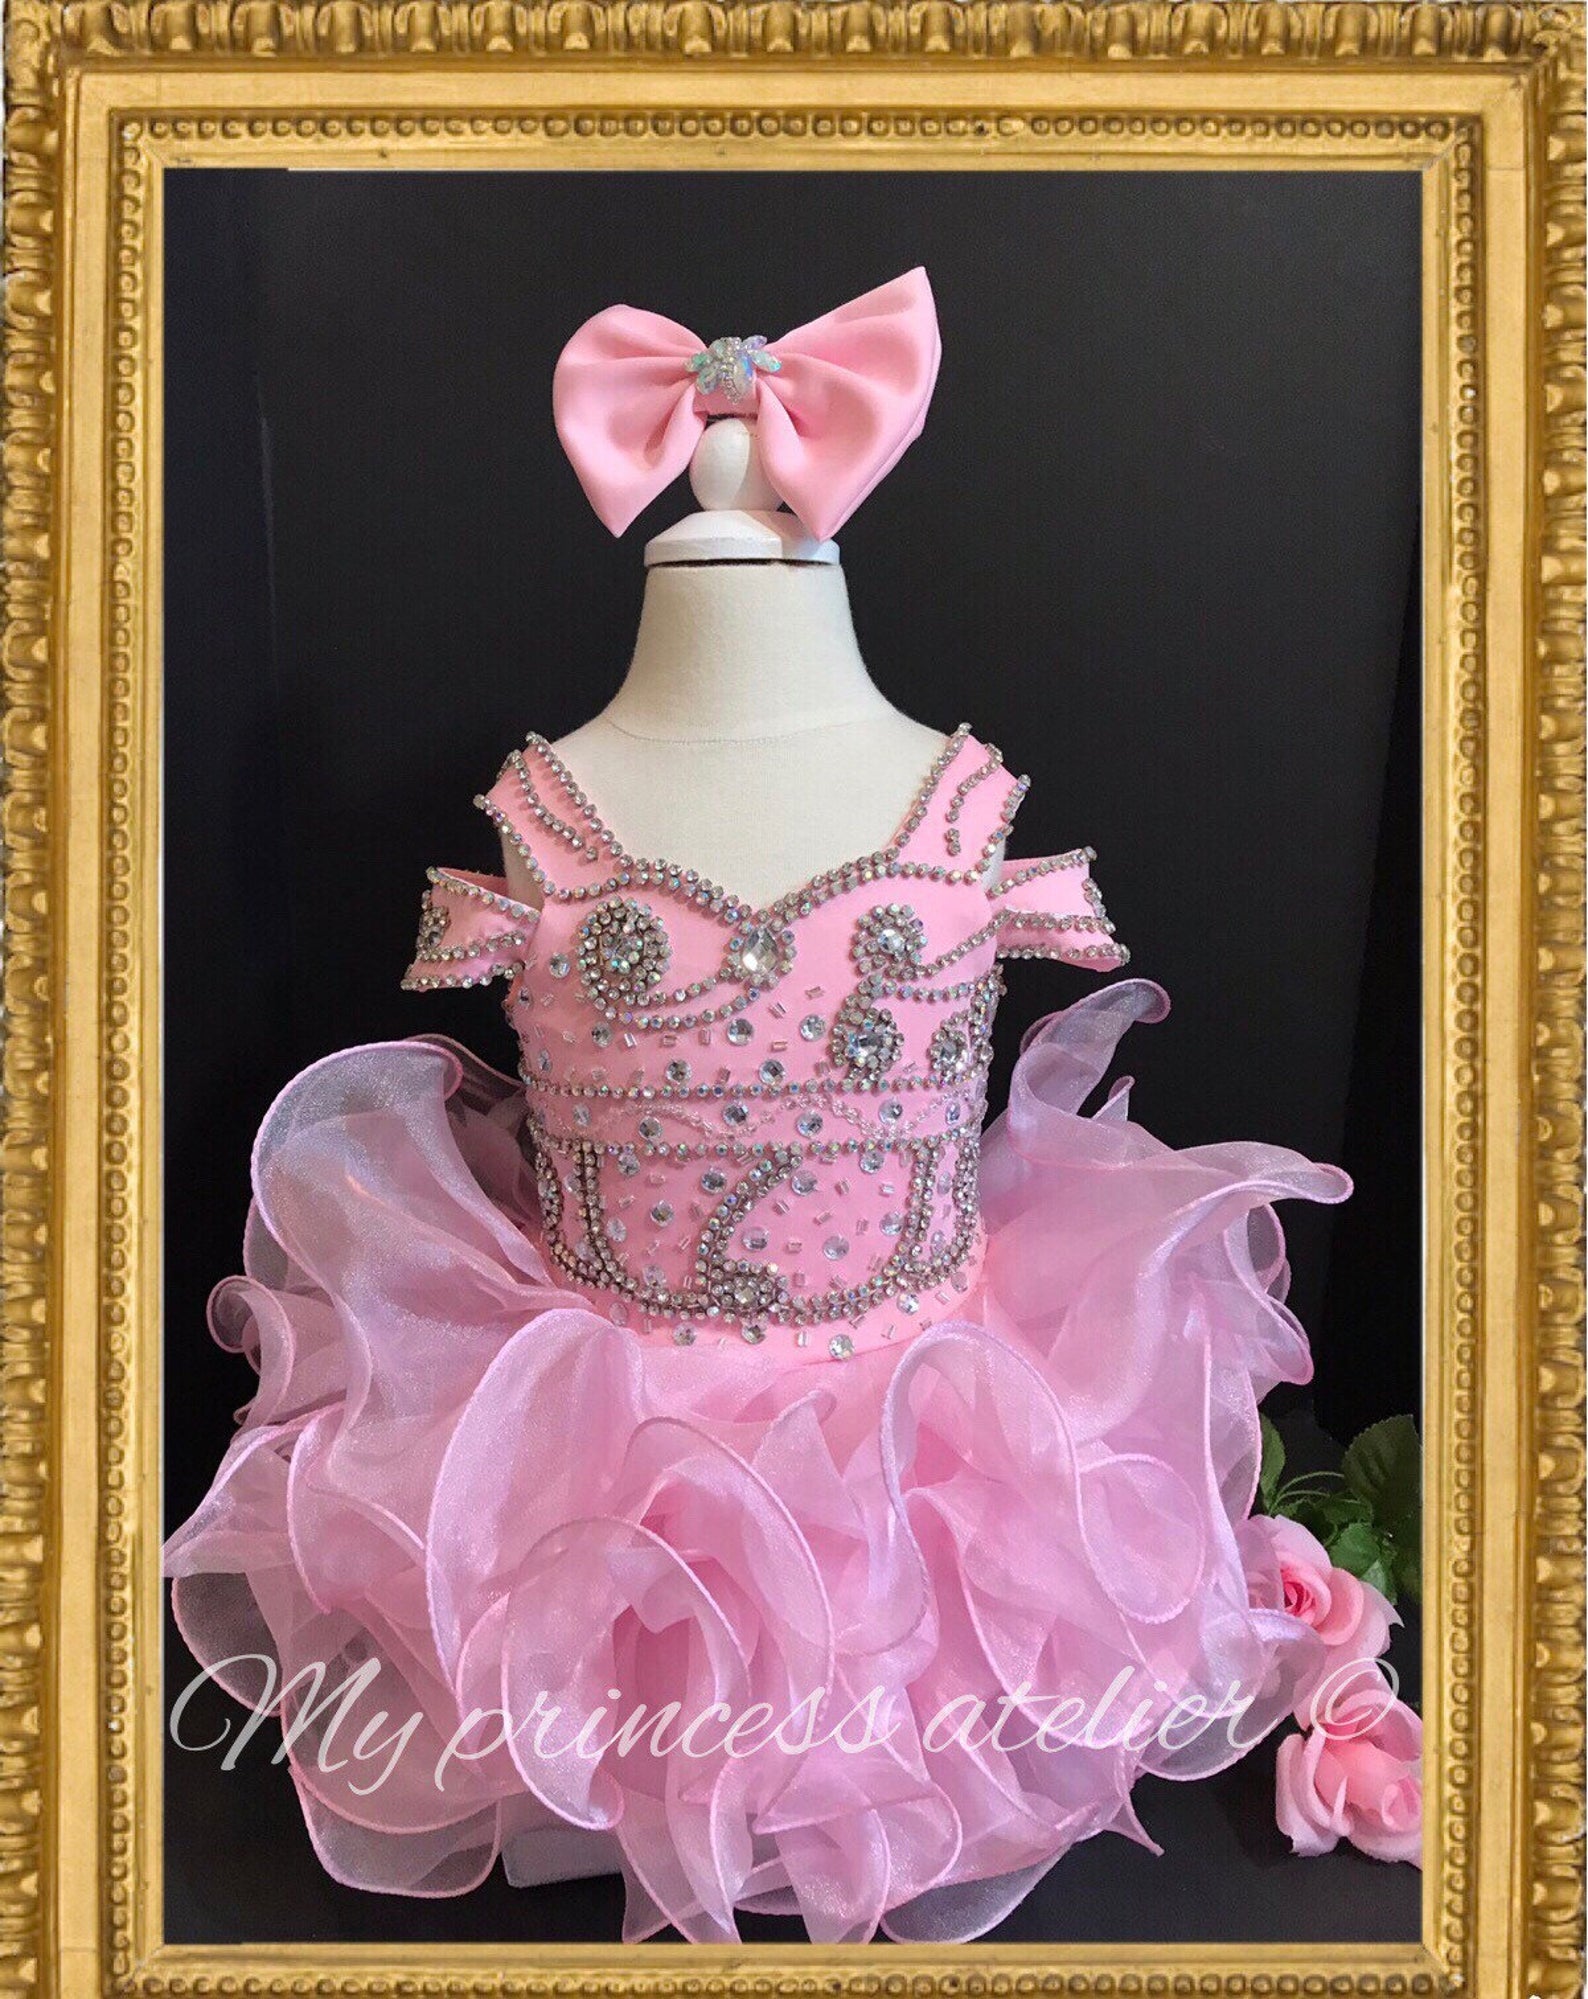 Pink pageant dress/ pink crystal flower girl dress/ pink first birthday dress/ pink princess dress/ pink mini bride dress/ princess dress/